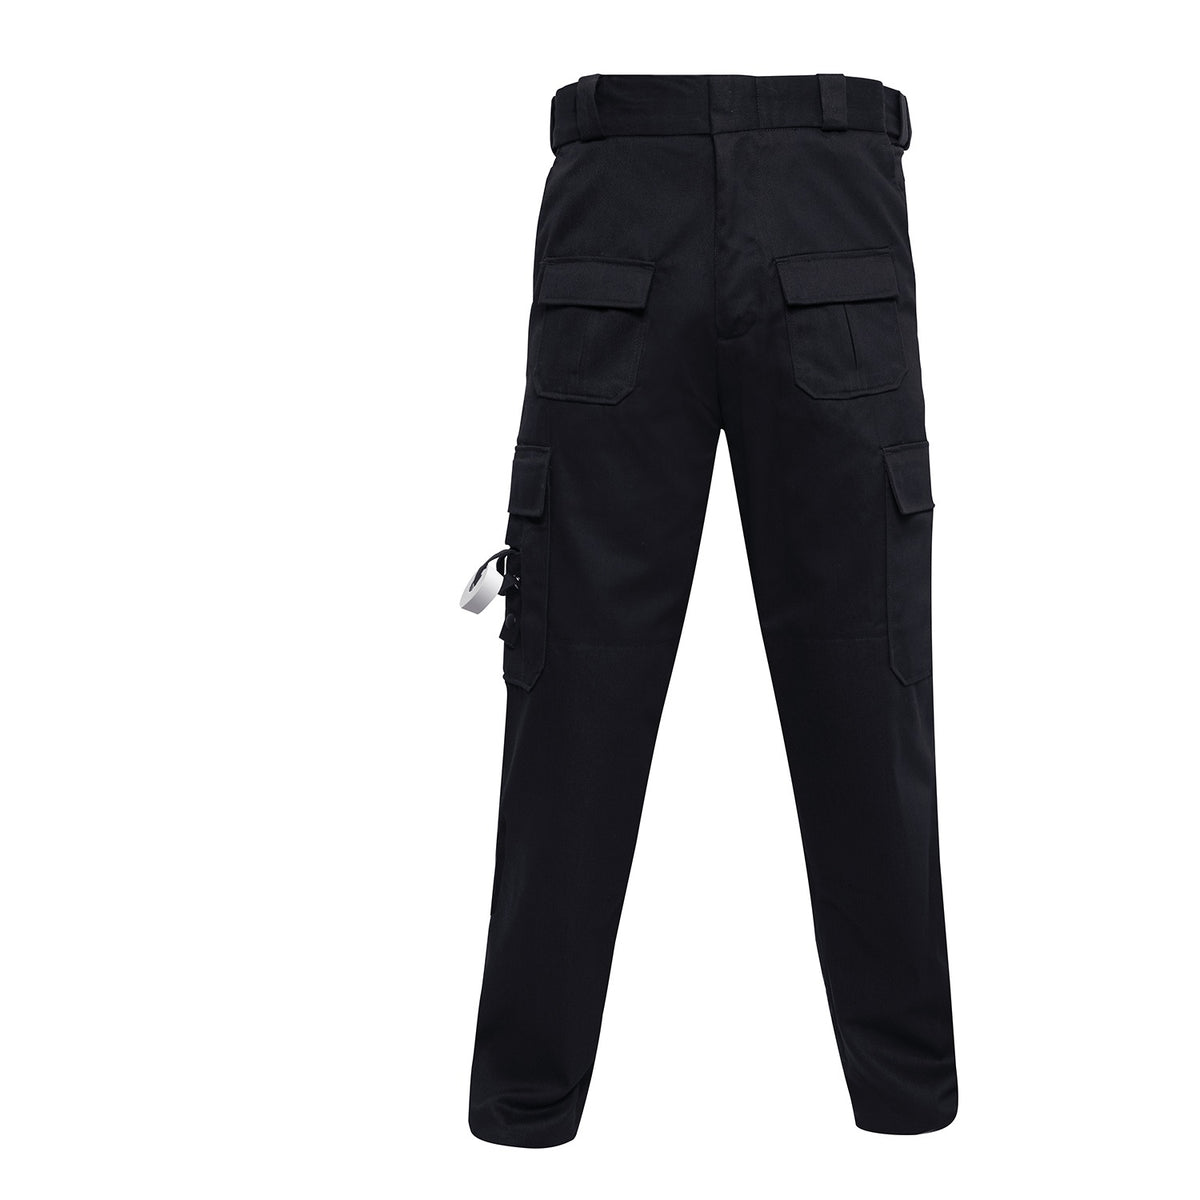 Rothco P.S.T (Public Safety Tactical) Pants - Midnight Navy Blue